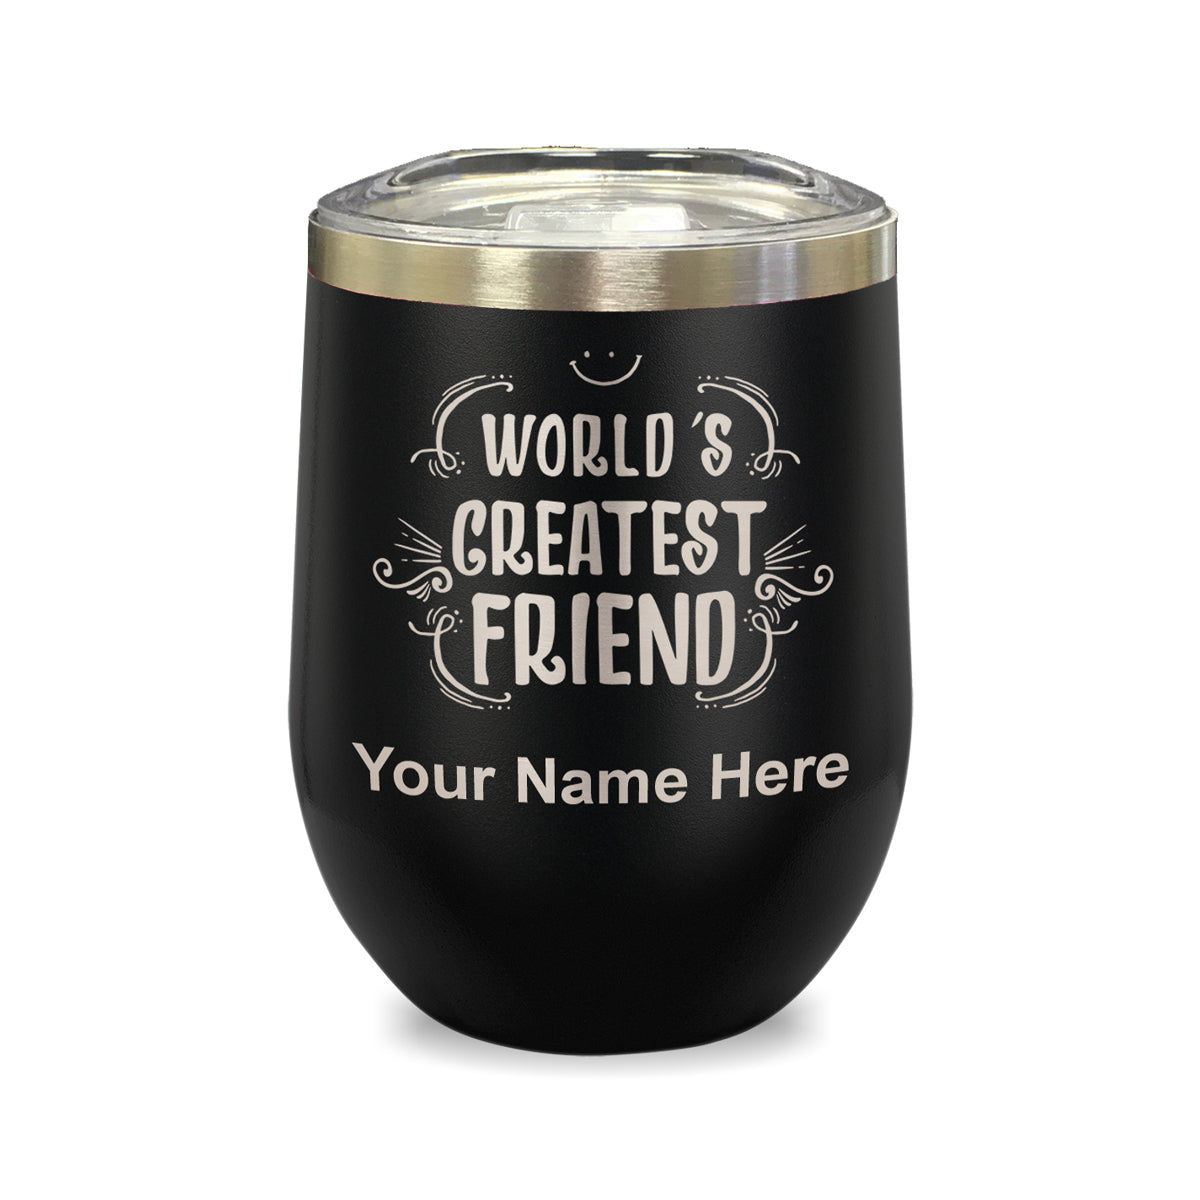 LaserGram Double Wall Stainless Steel Wine Glass, World's Greatest Friend, Personalized Engraving Included